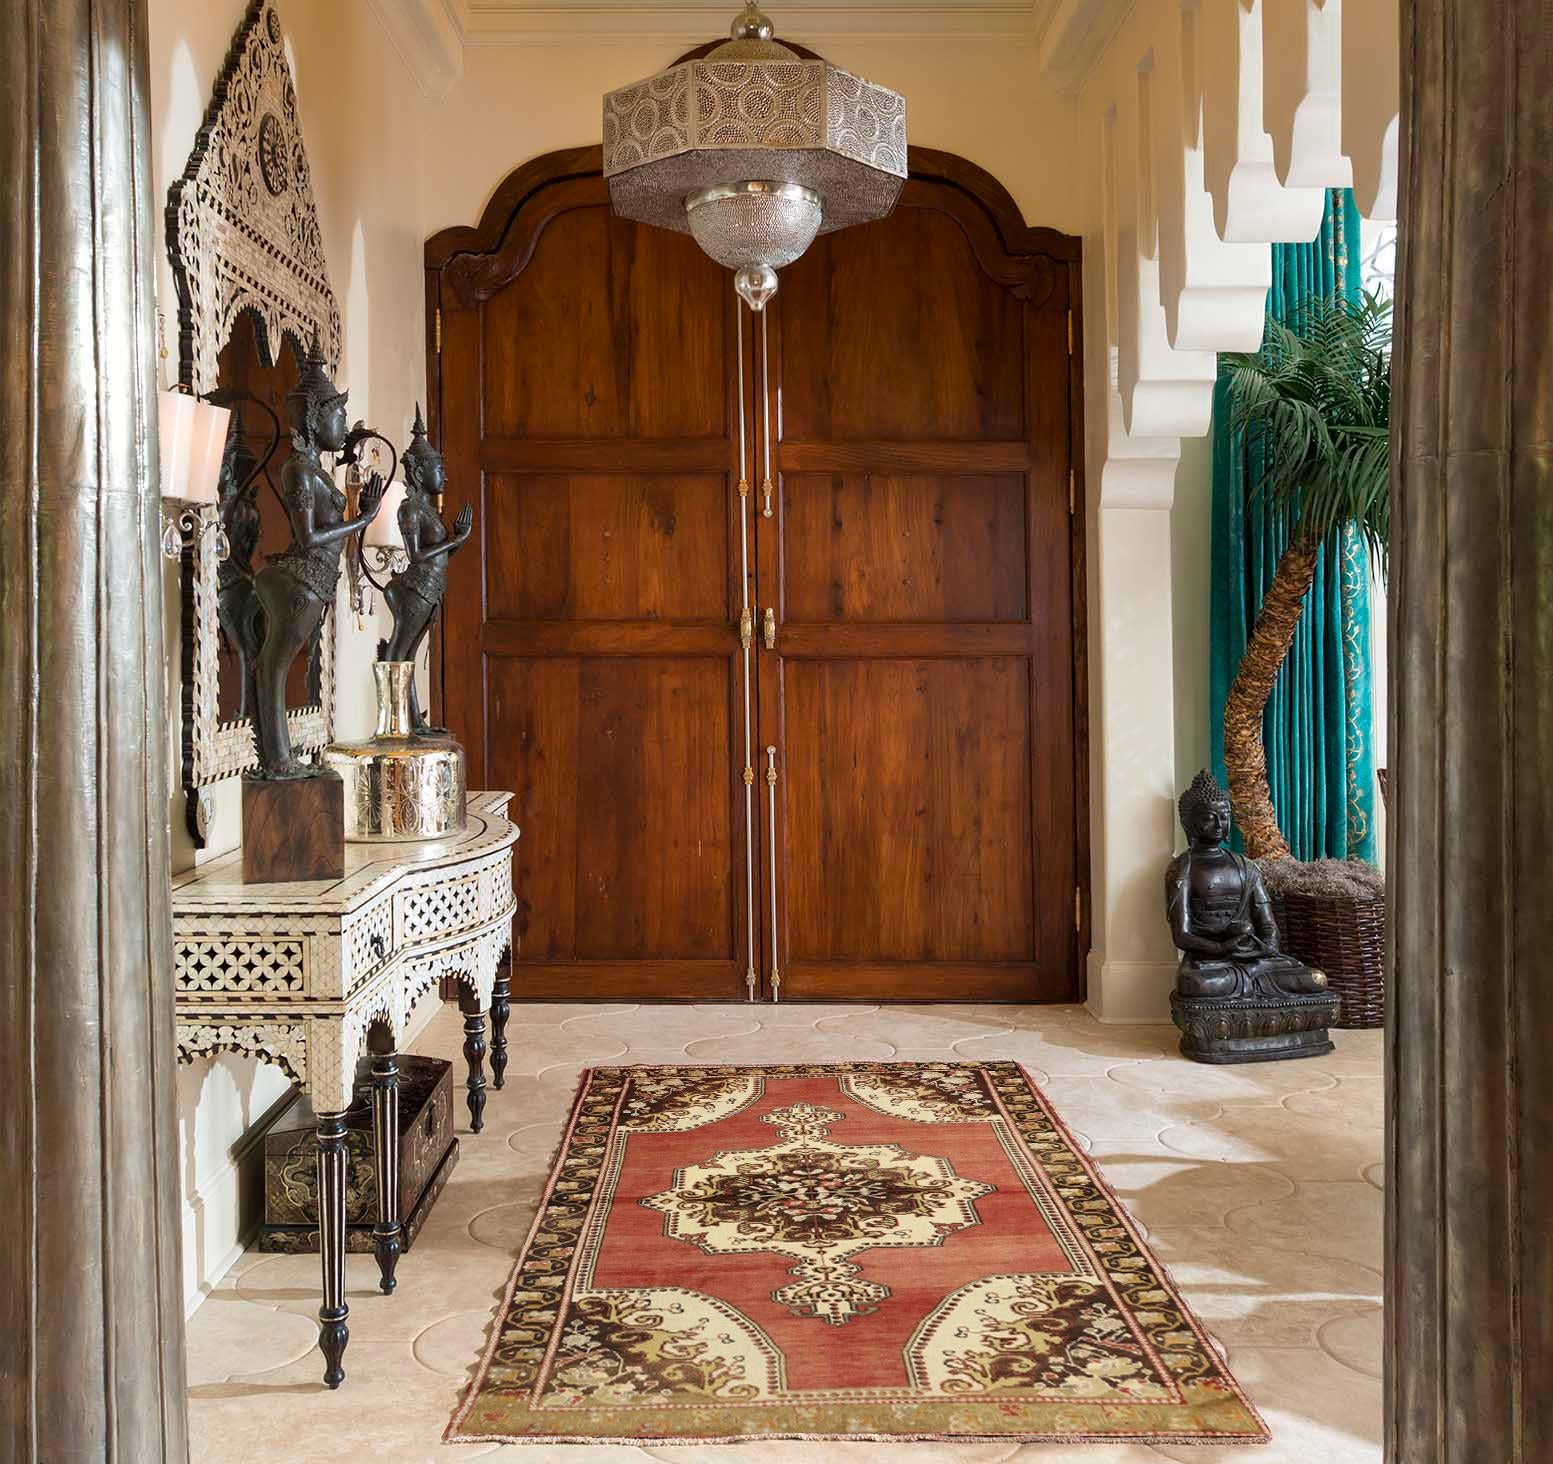 50761, vintage Turkish Oushak accent rug with Rustic Tudor style. This traditional style Oushak accent rug features an intricate medallion of warm brown, charcoal and creamy ivory with a central stylized floral design accented with delicate pink